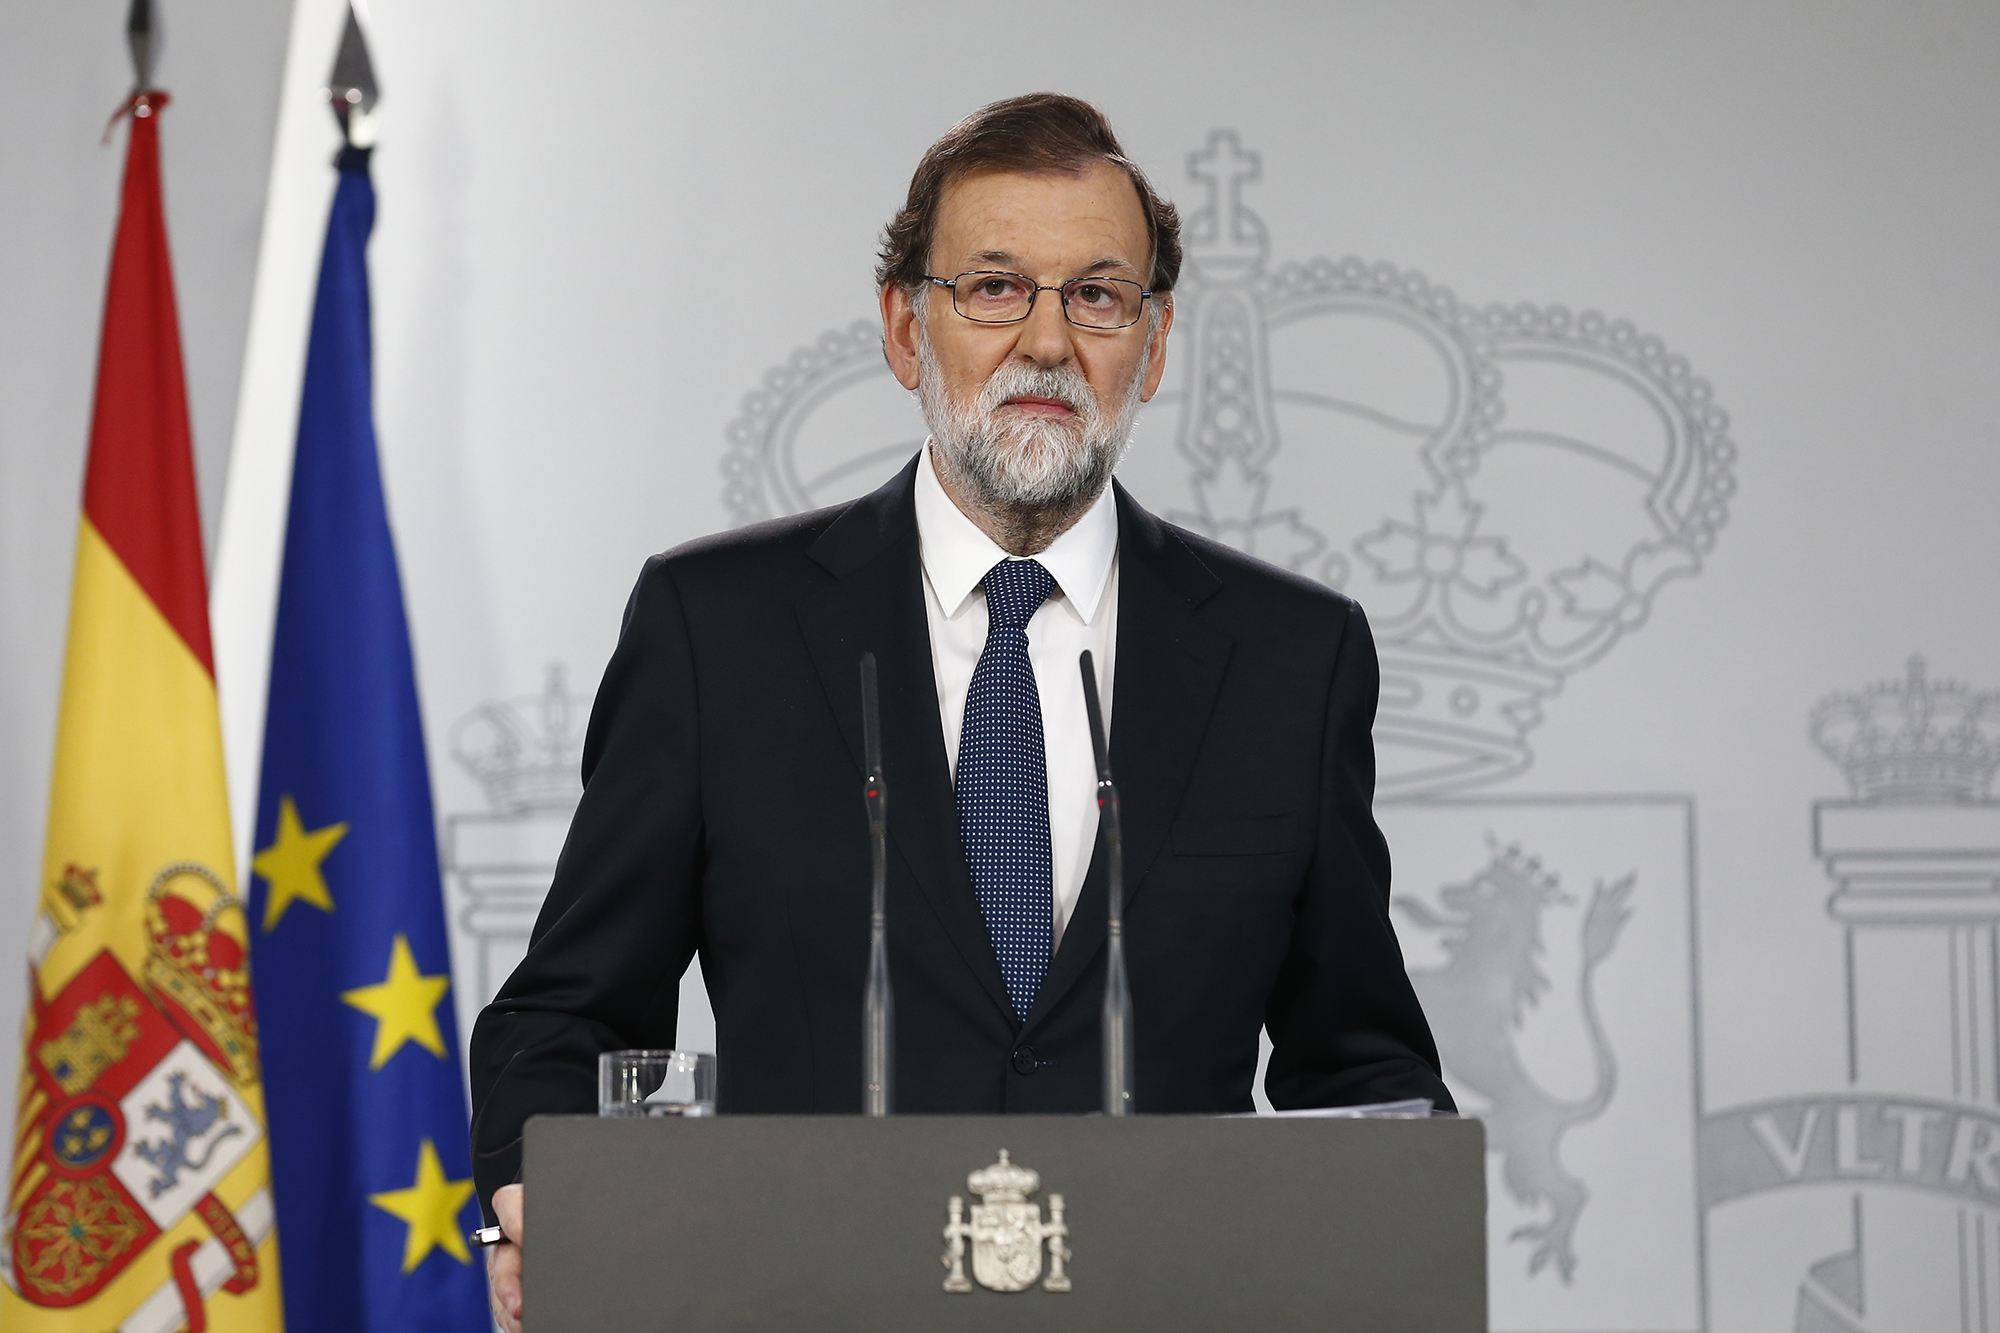 Spanish president Mariano Rajoy at a press conference on October 1 (by ACN)